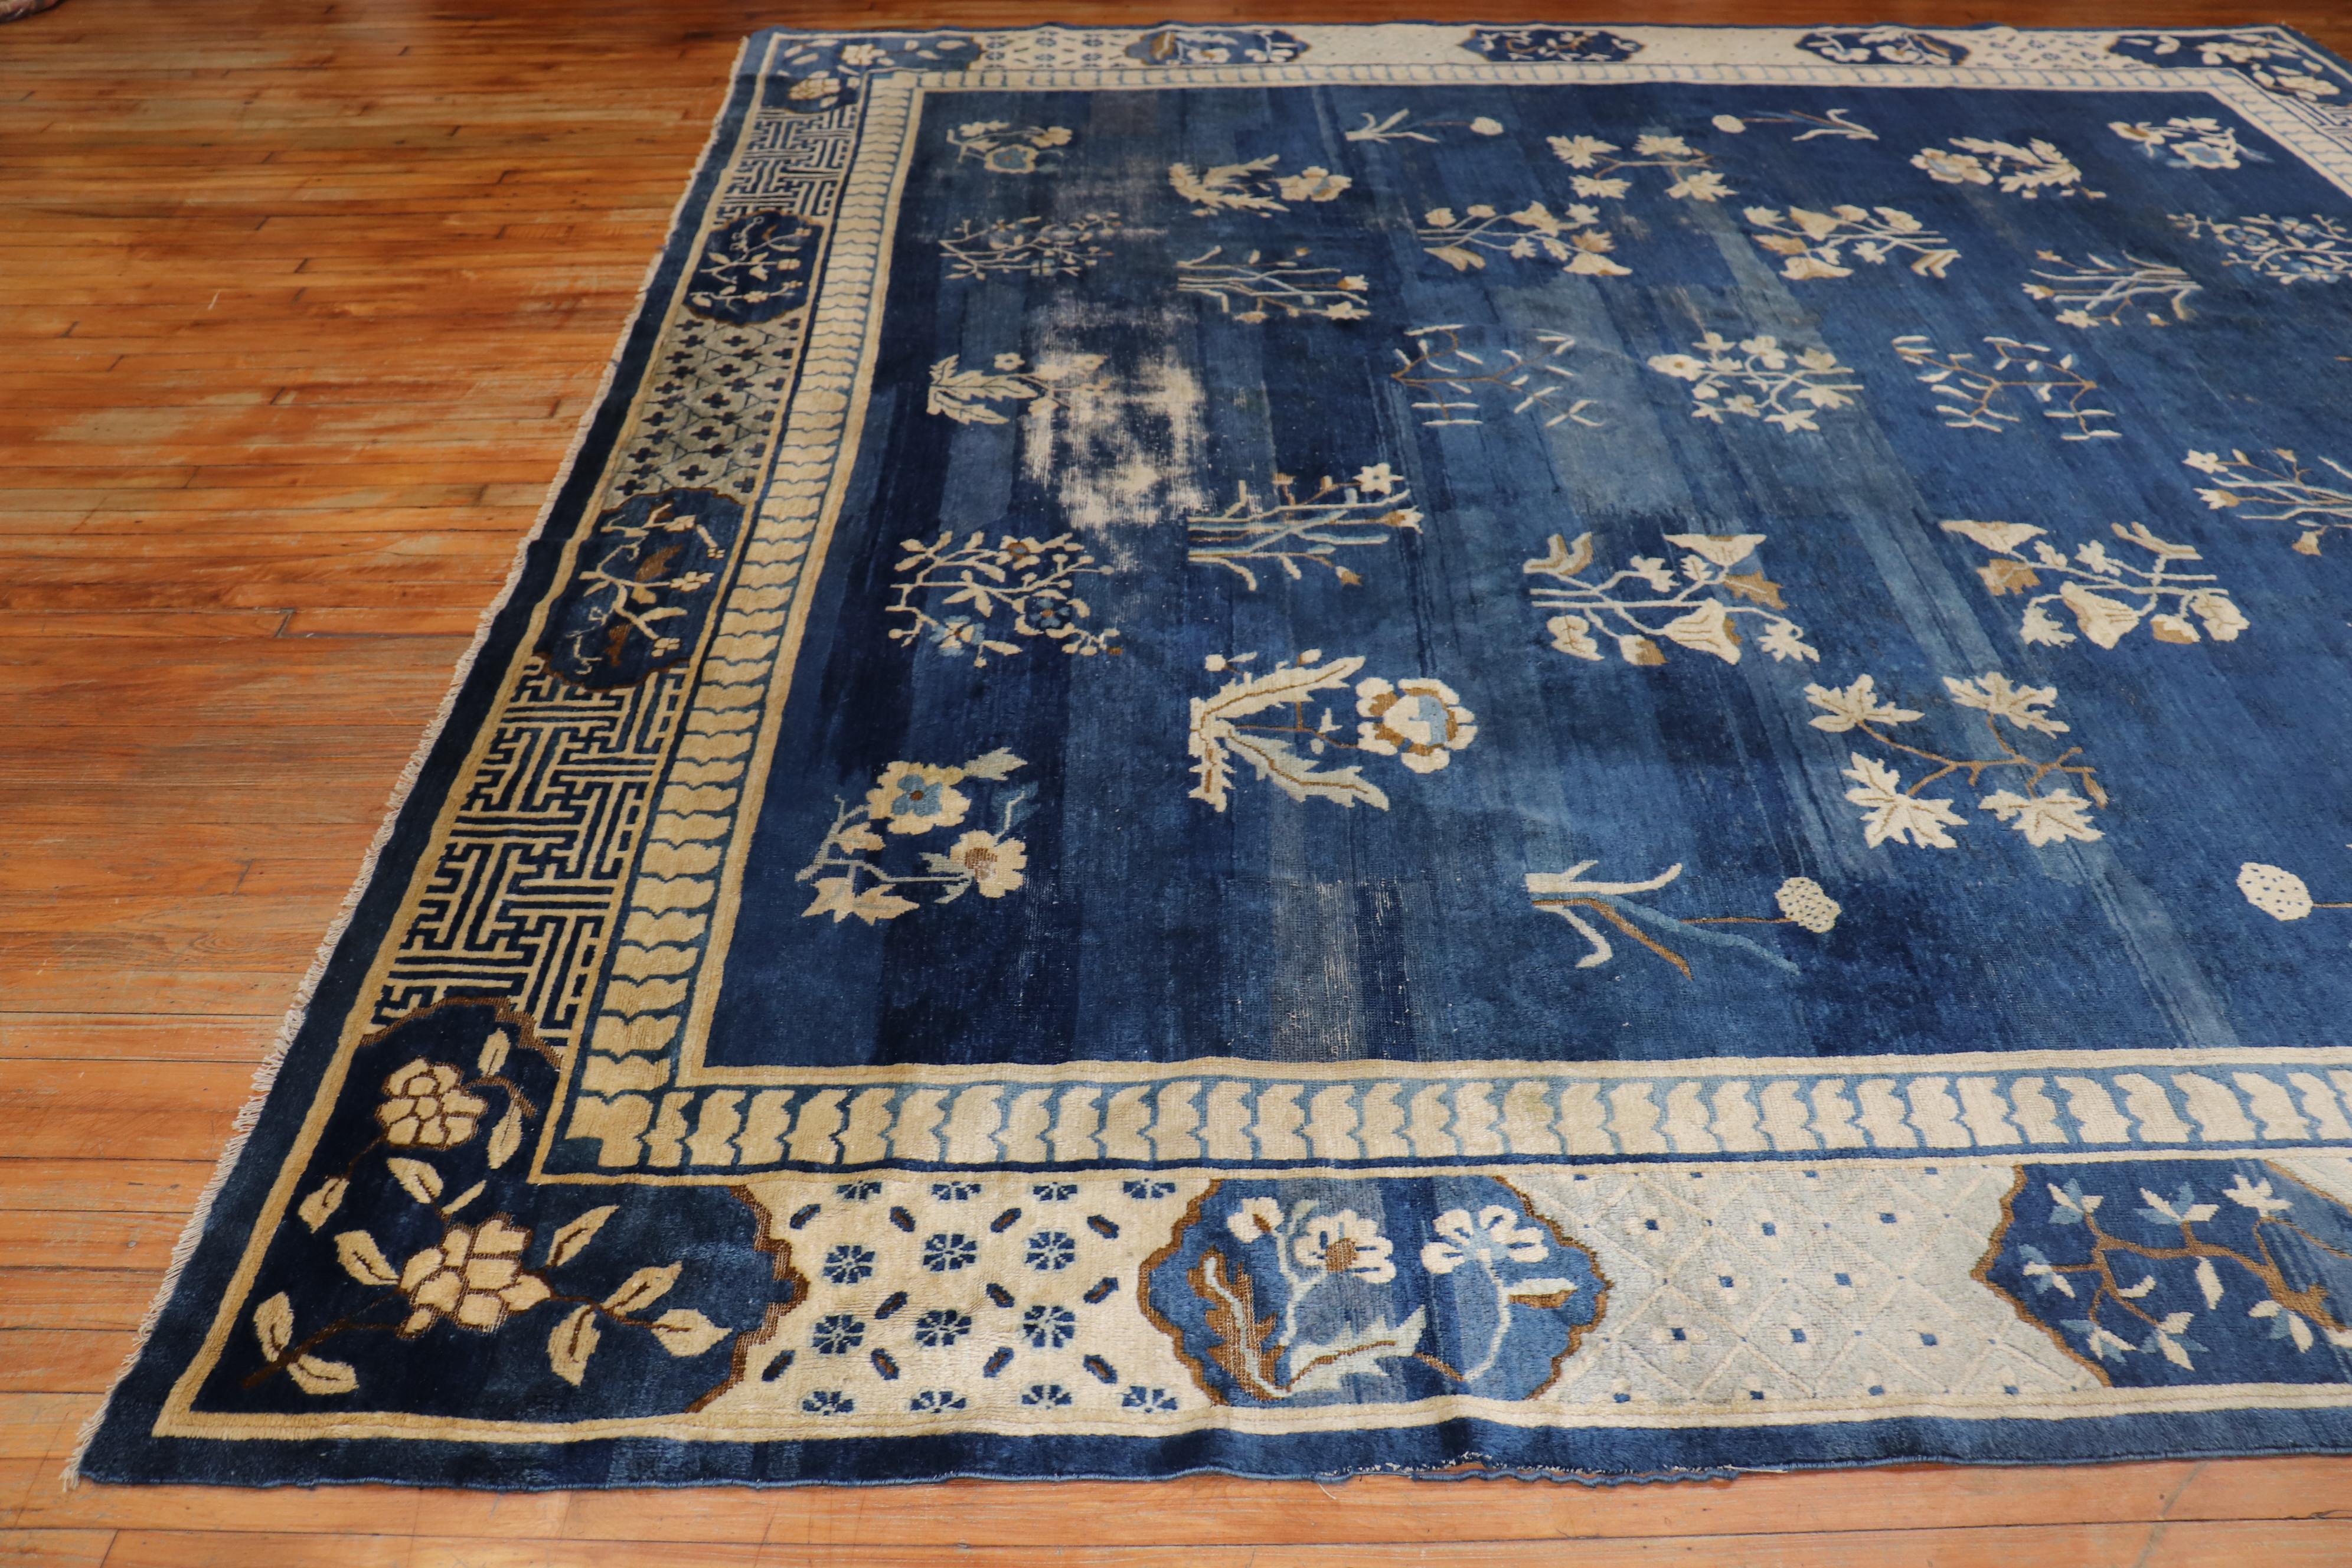 A rare 11-foot square early 20th-century shabby chic weather textured Chinese rug with a graphic floral Motif in denim blue, accents in white, and hints of brown

Measures: 11' x 11'1